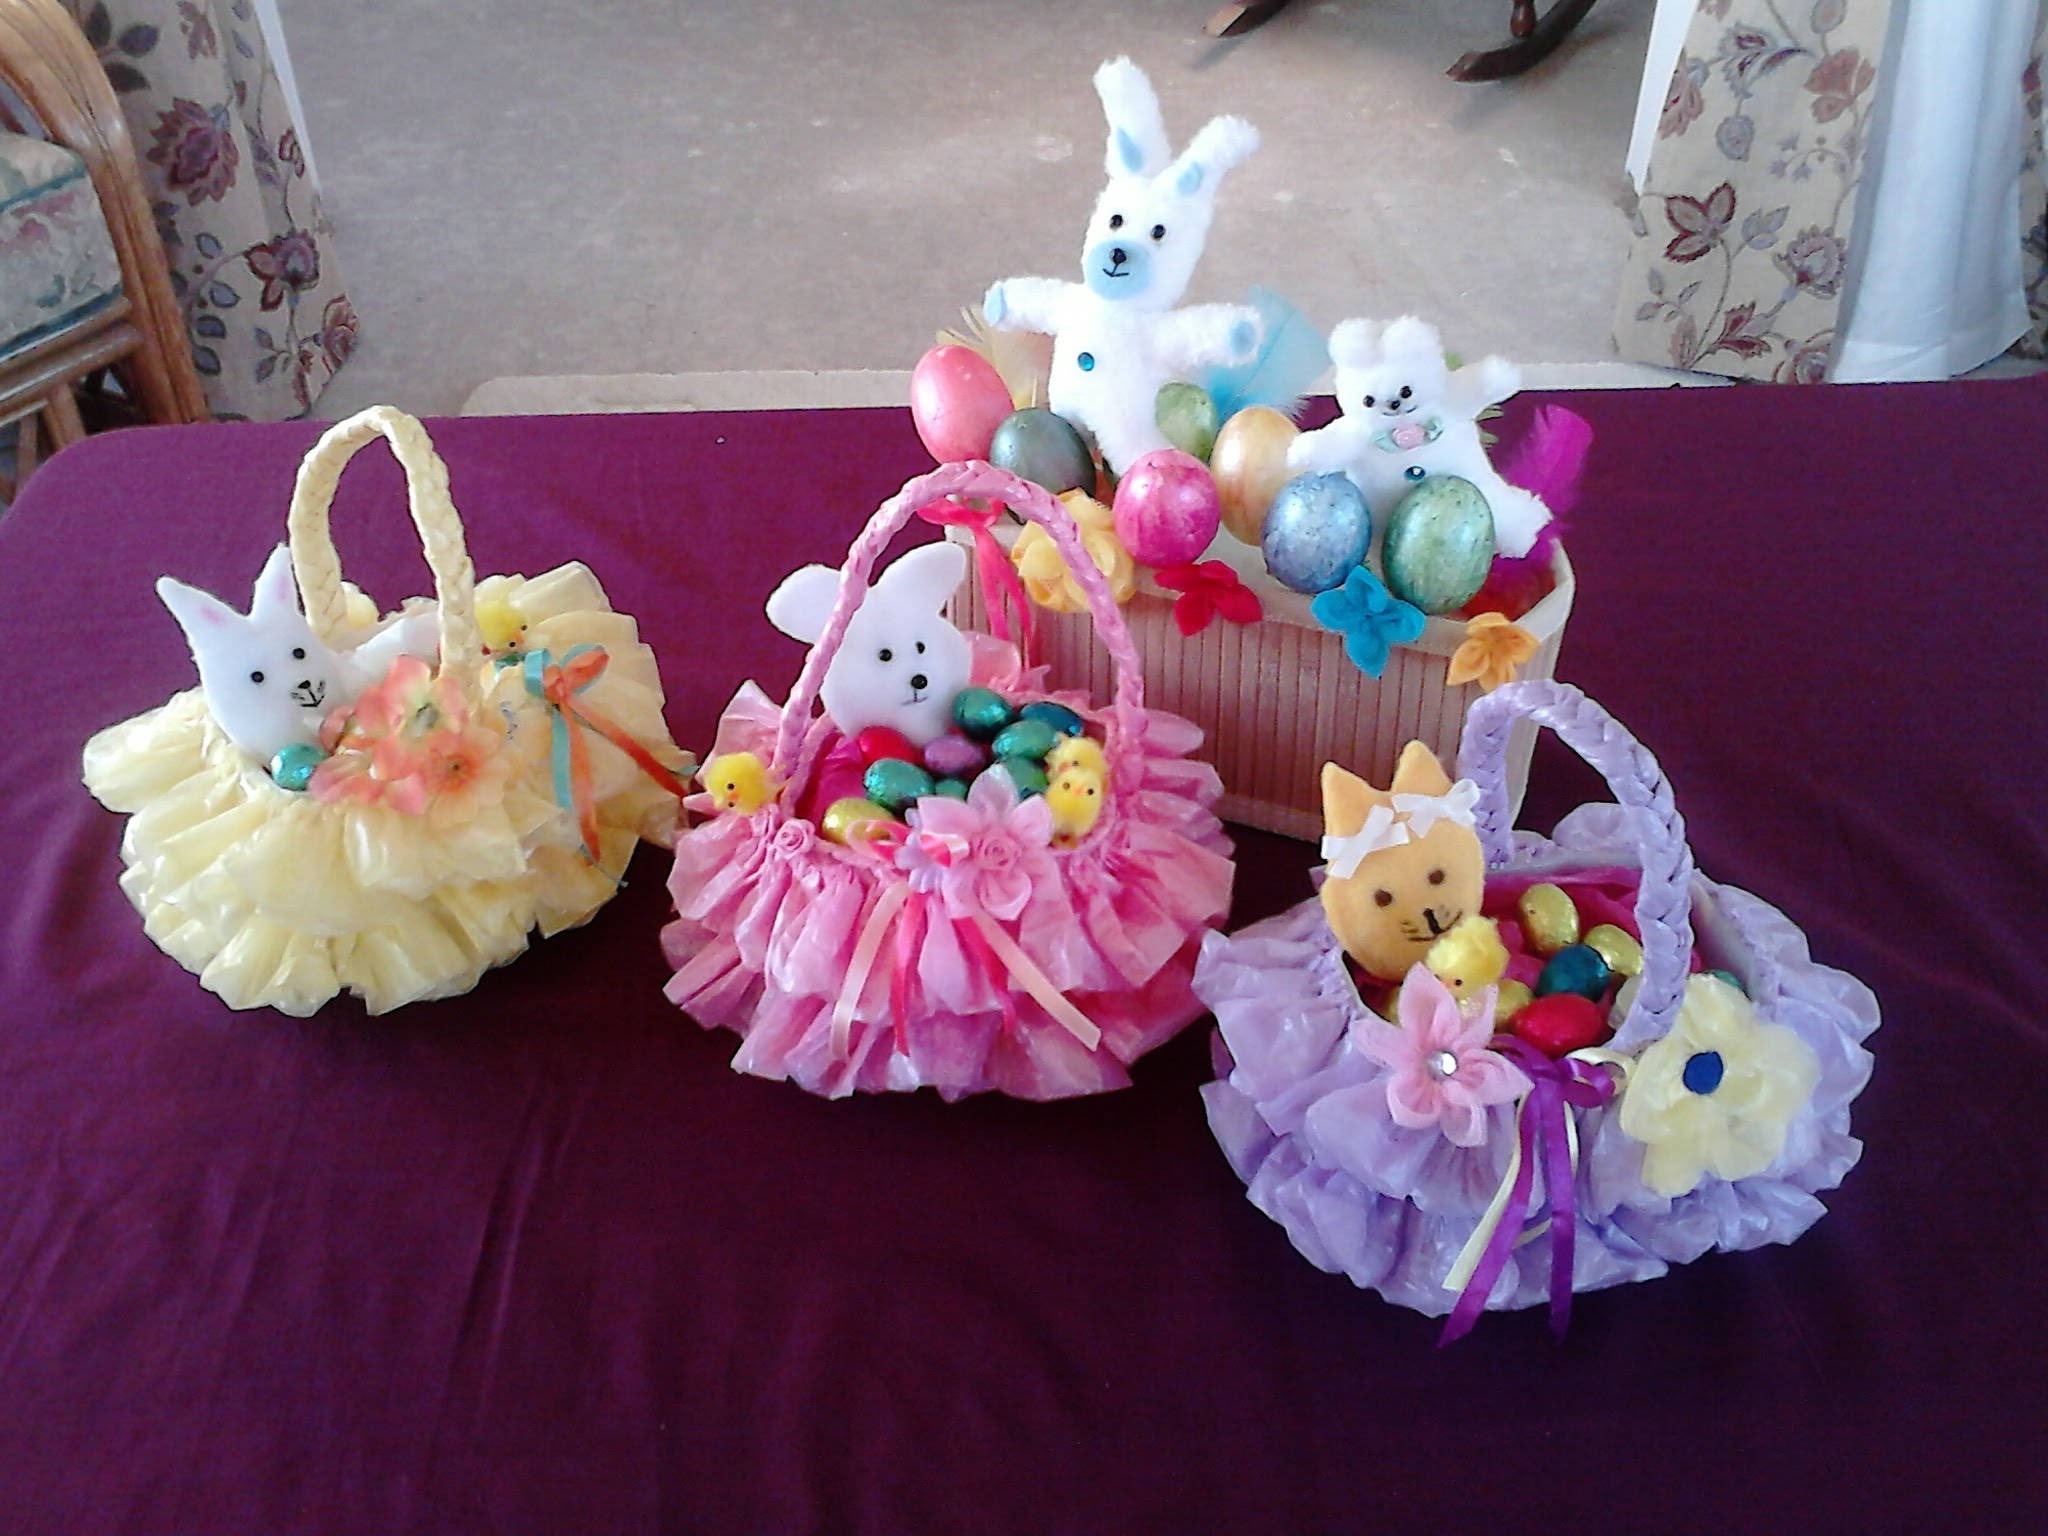 Easter Baskets - made from recycled plastic bags and bottles - wonderfuldiy1